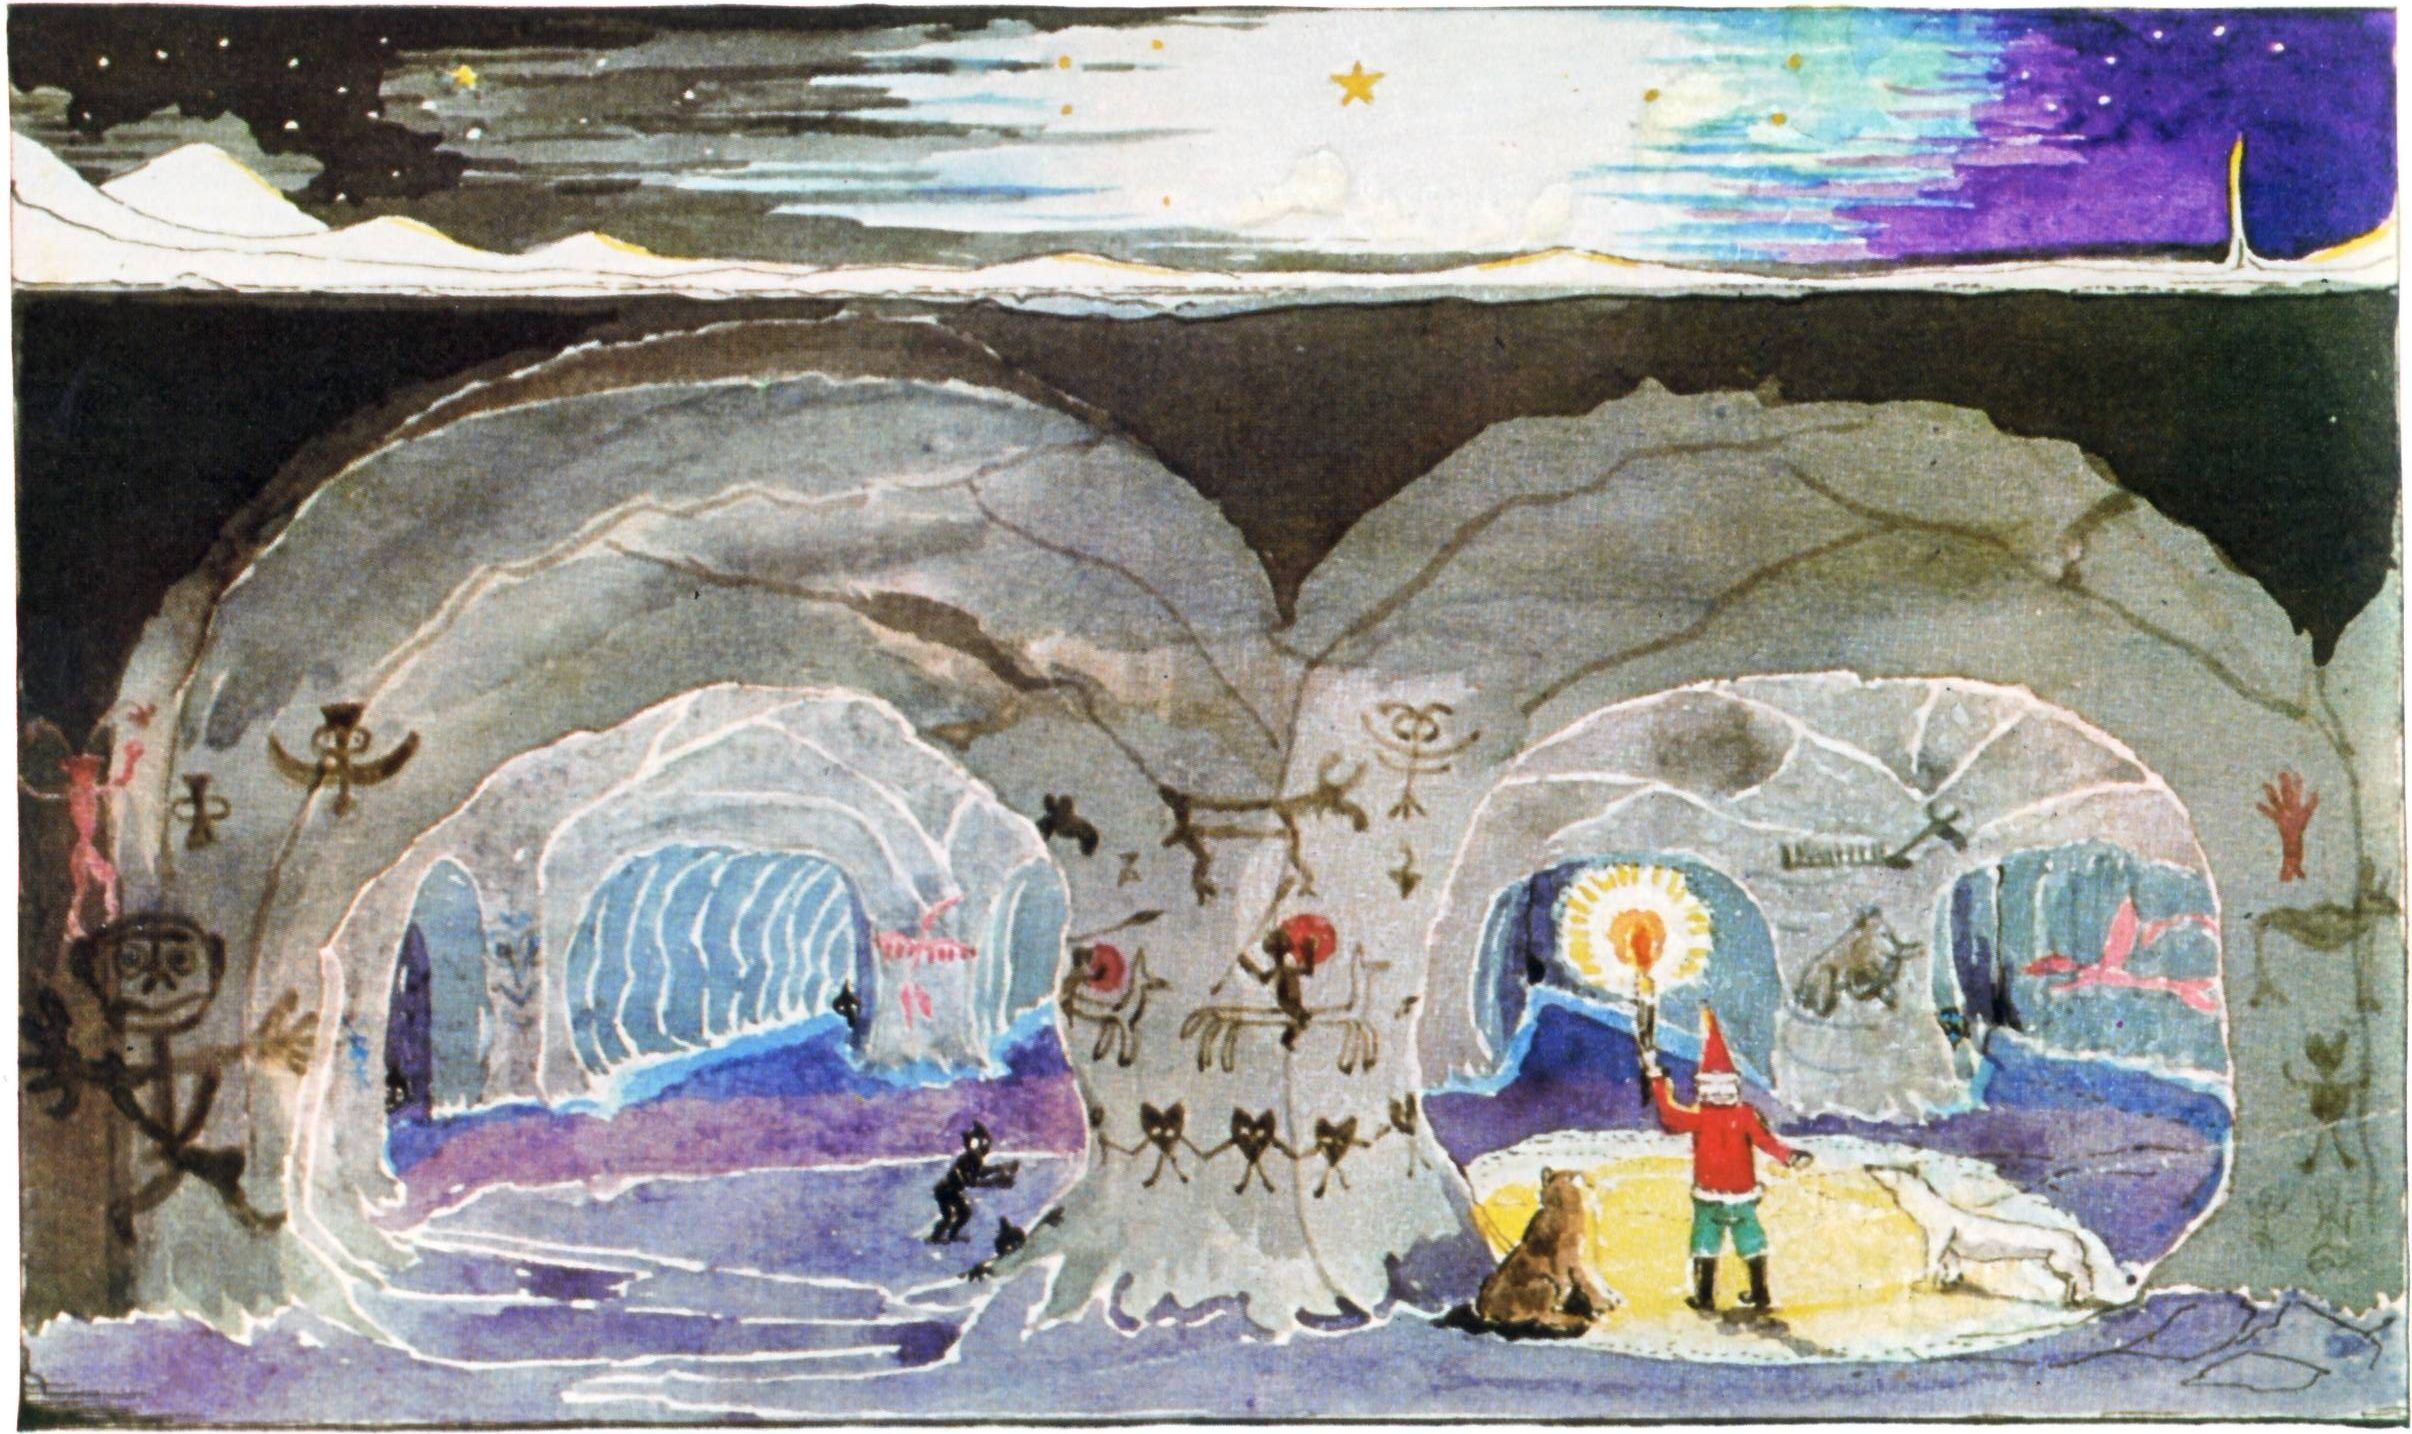 illustration by jrr tolkien from letters to father christmas. santa in cave